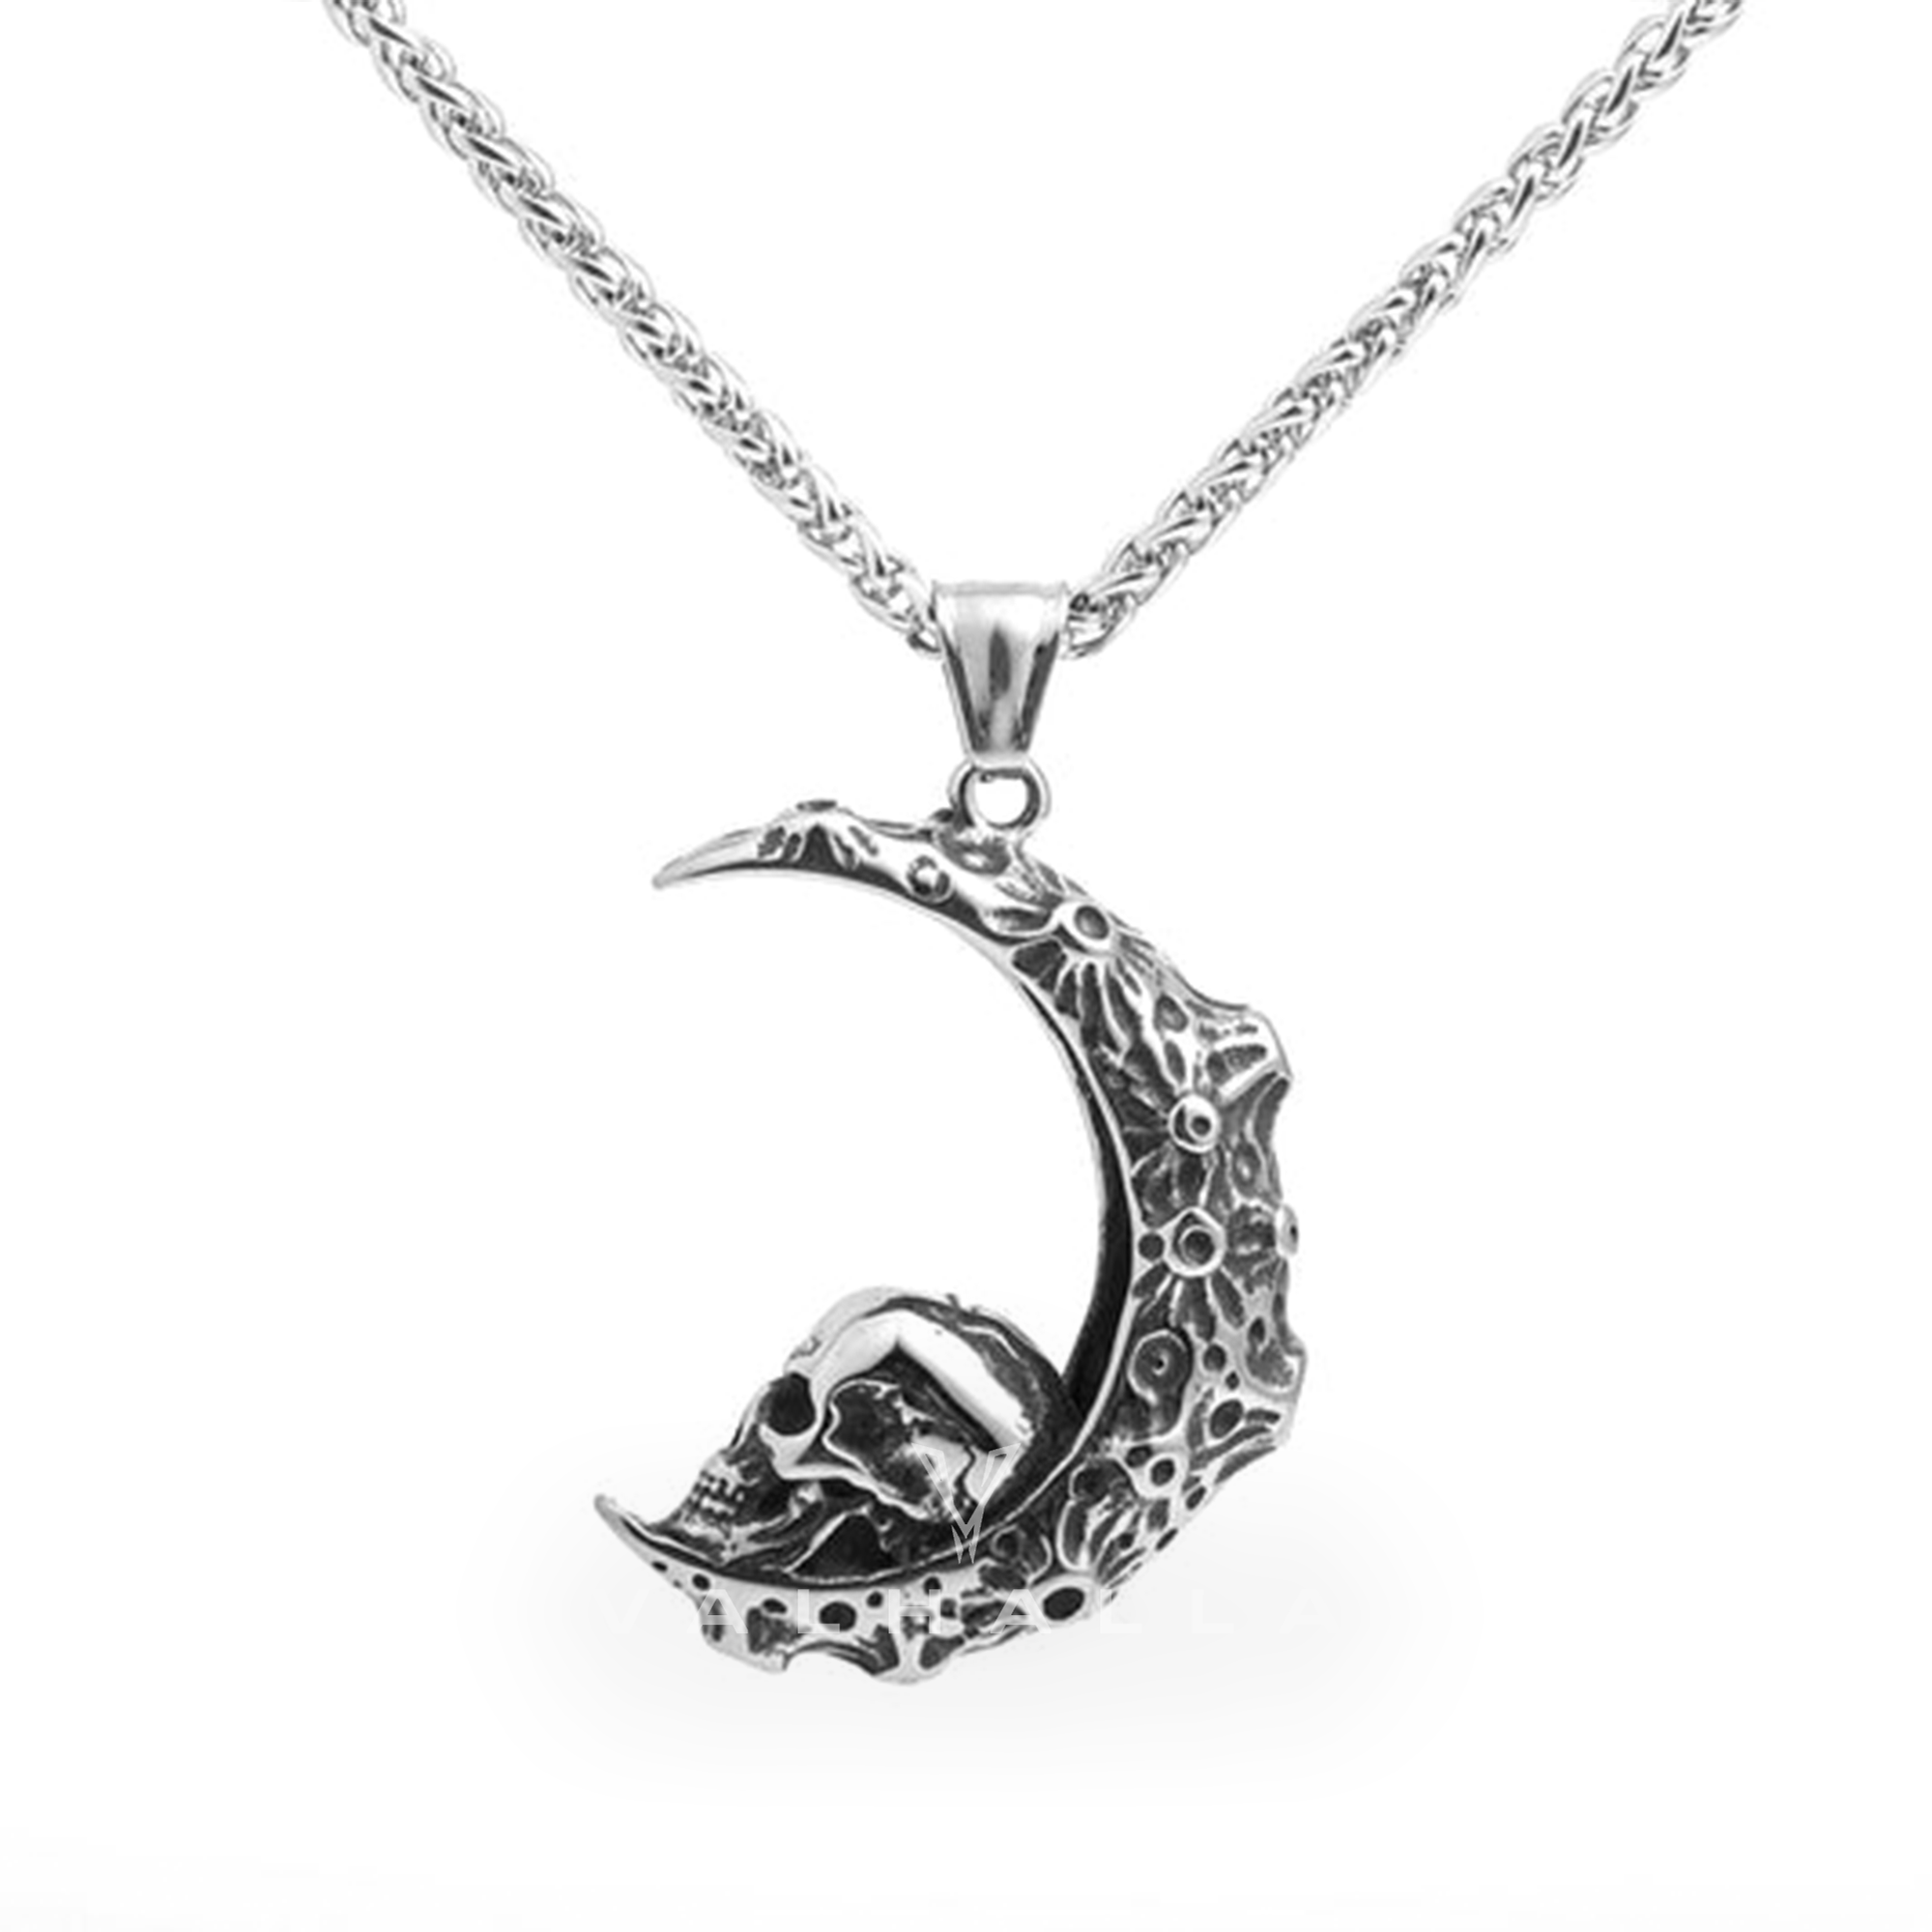 The Moon and Skull Stainless Steel Pendant & Chain